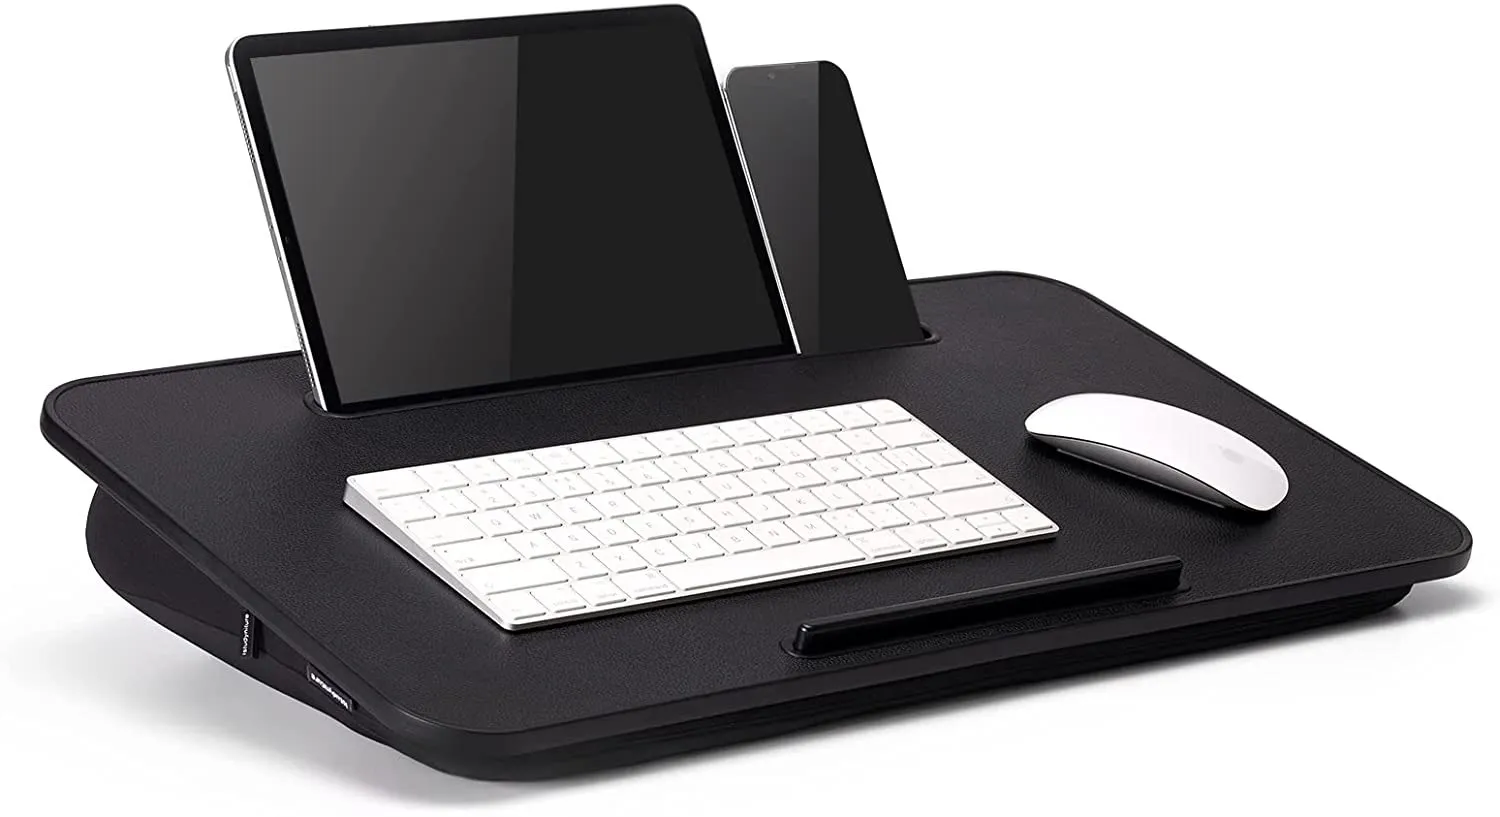 PORTABLE LAP DESK LAPTOP TRAY WITH PILLOW CUSHION MOUSE PAD PHONE TABLET  SLOT